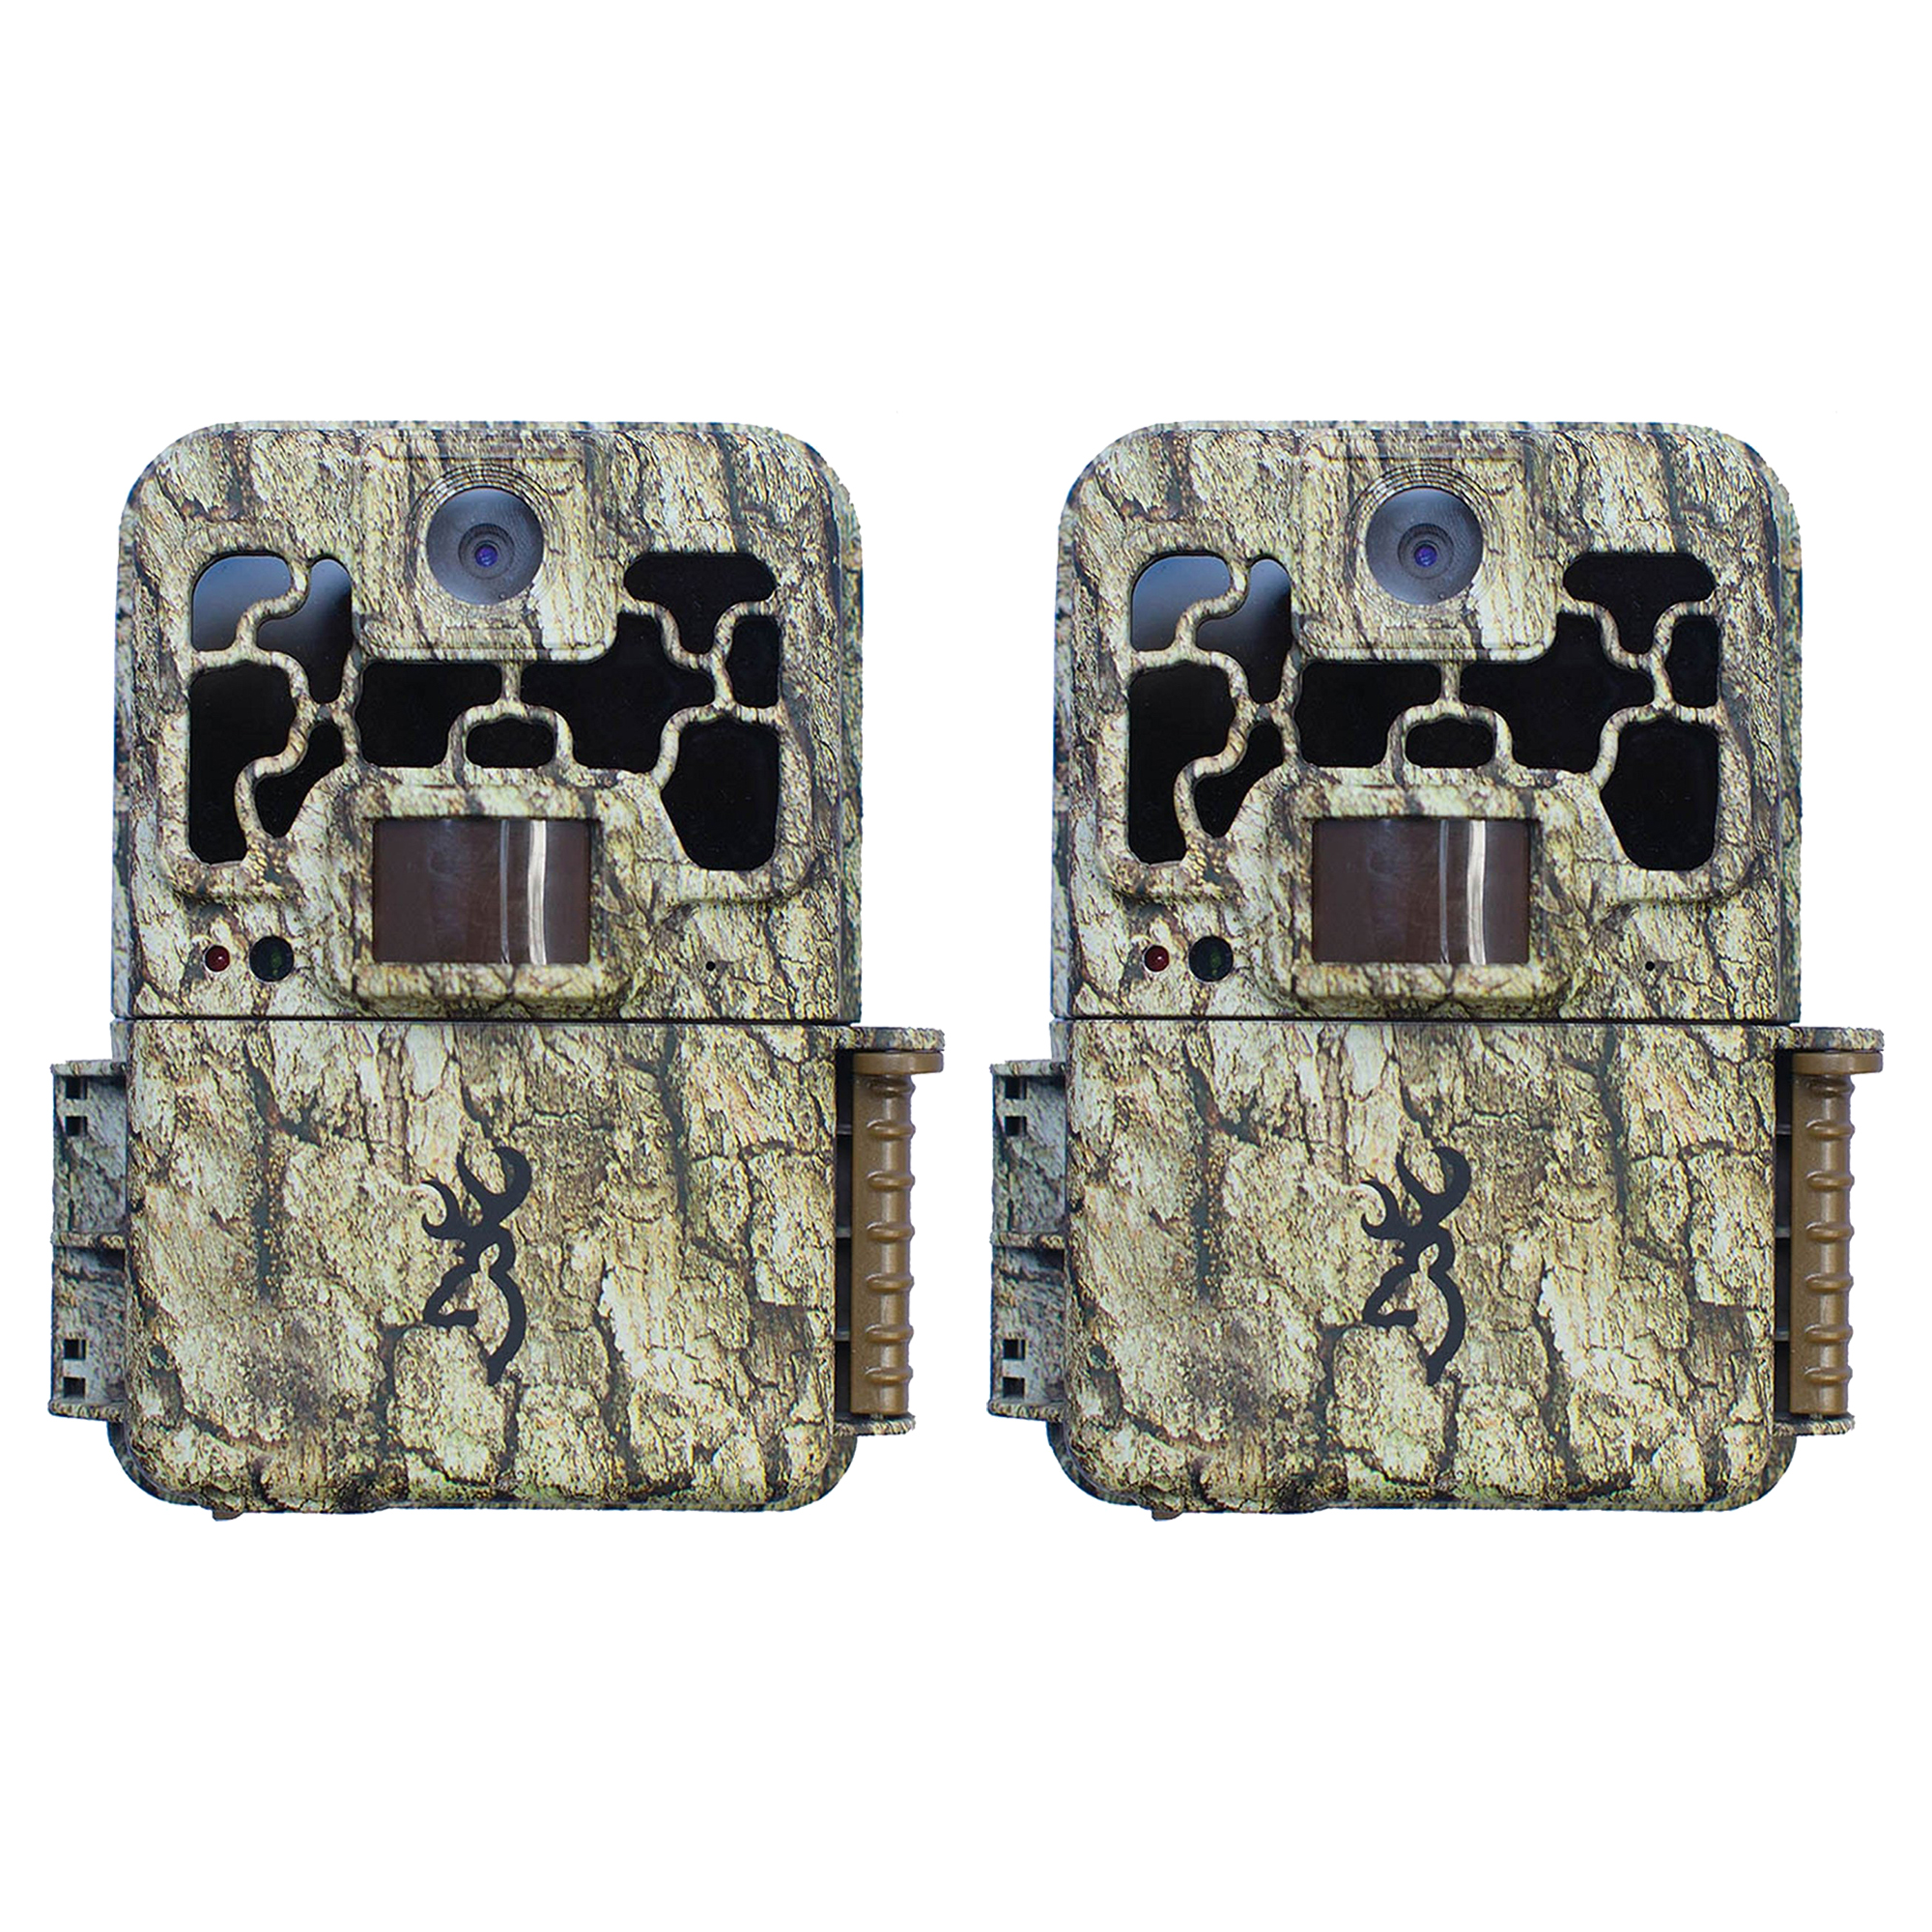 Browning Trail Cameras Spec Ops 10MP FHD Video IR Game 